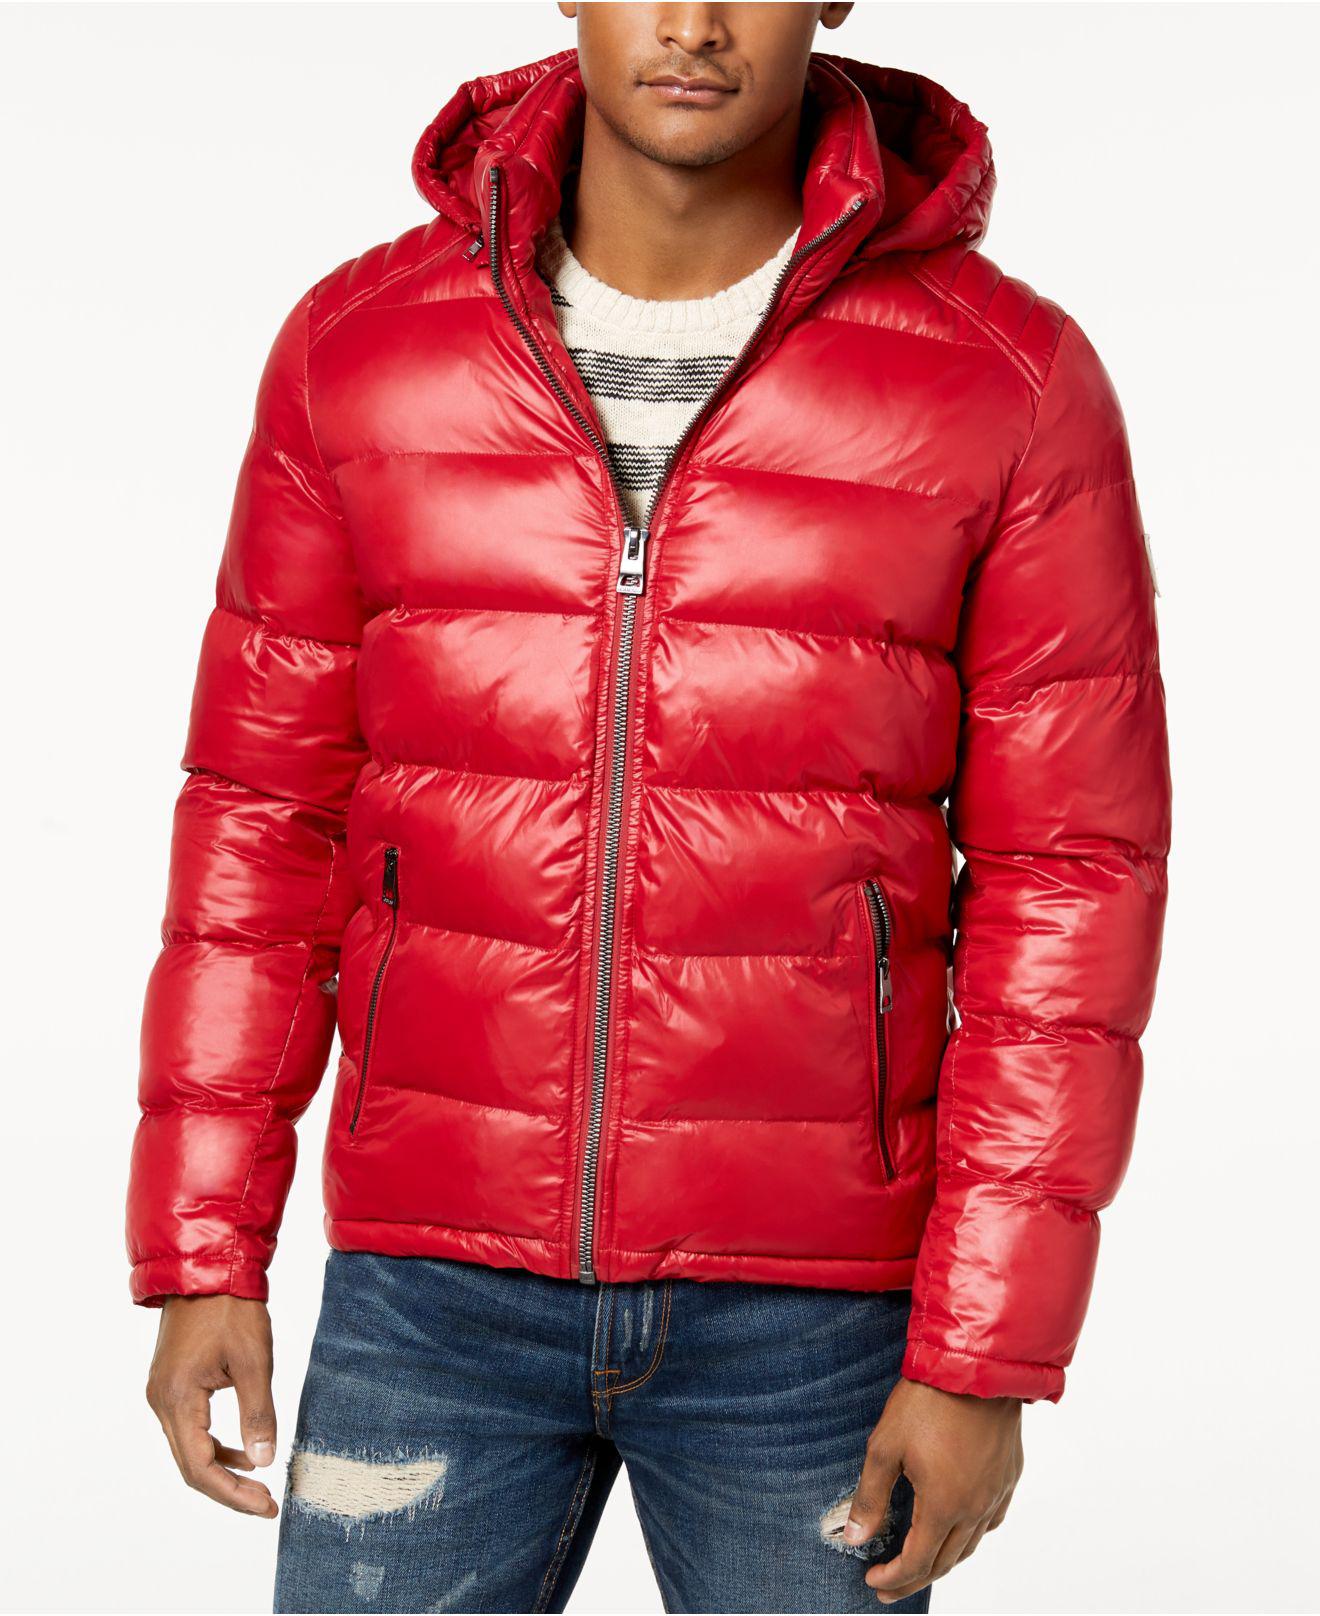 Guess Synthetic Men's Hooded Puffer Coat in Red for Men - Lyst